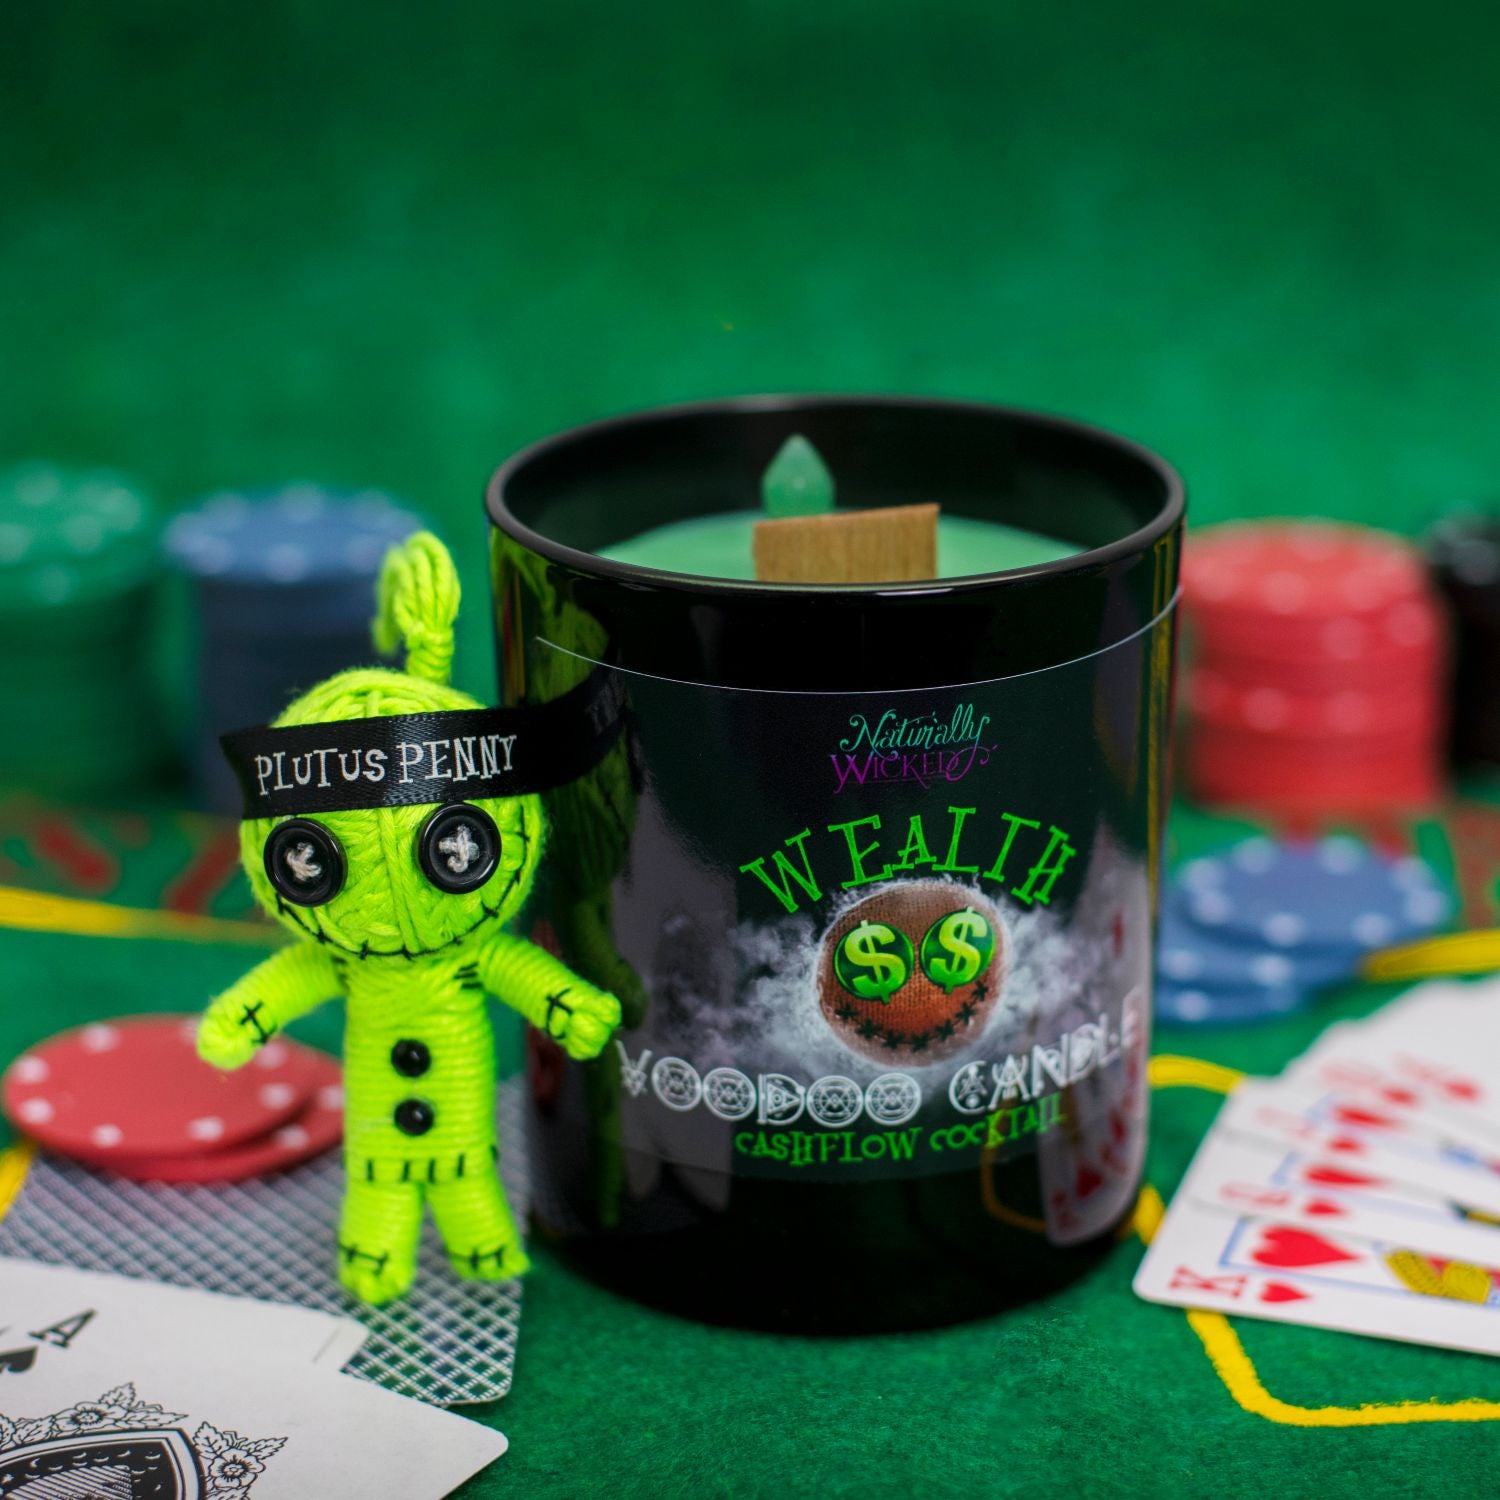 Naturally Wicked Voodoo Wealth Candle On Green Casino Table Amongst Green Voodoo Doll, Poker Chips & Playing Cards